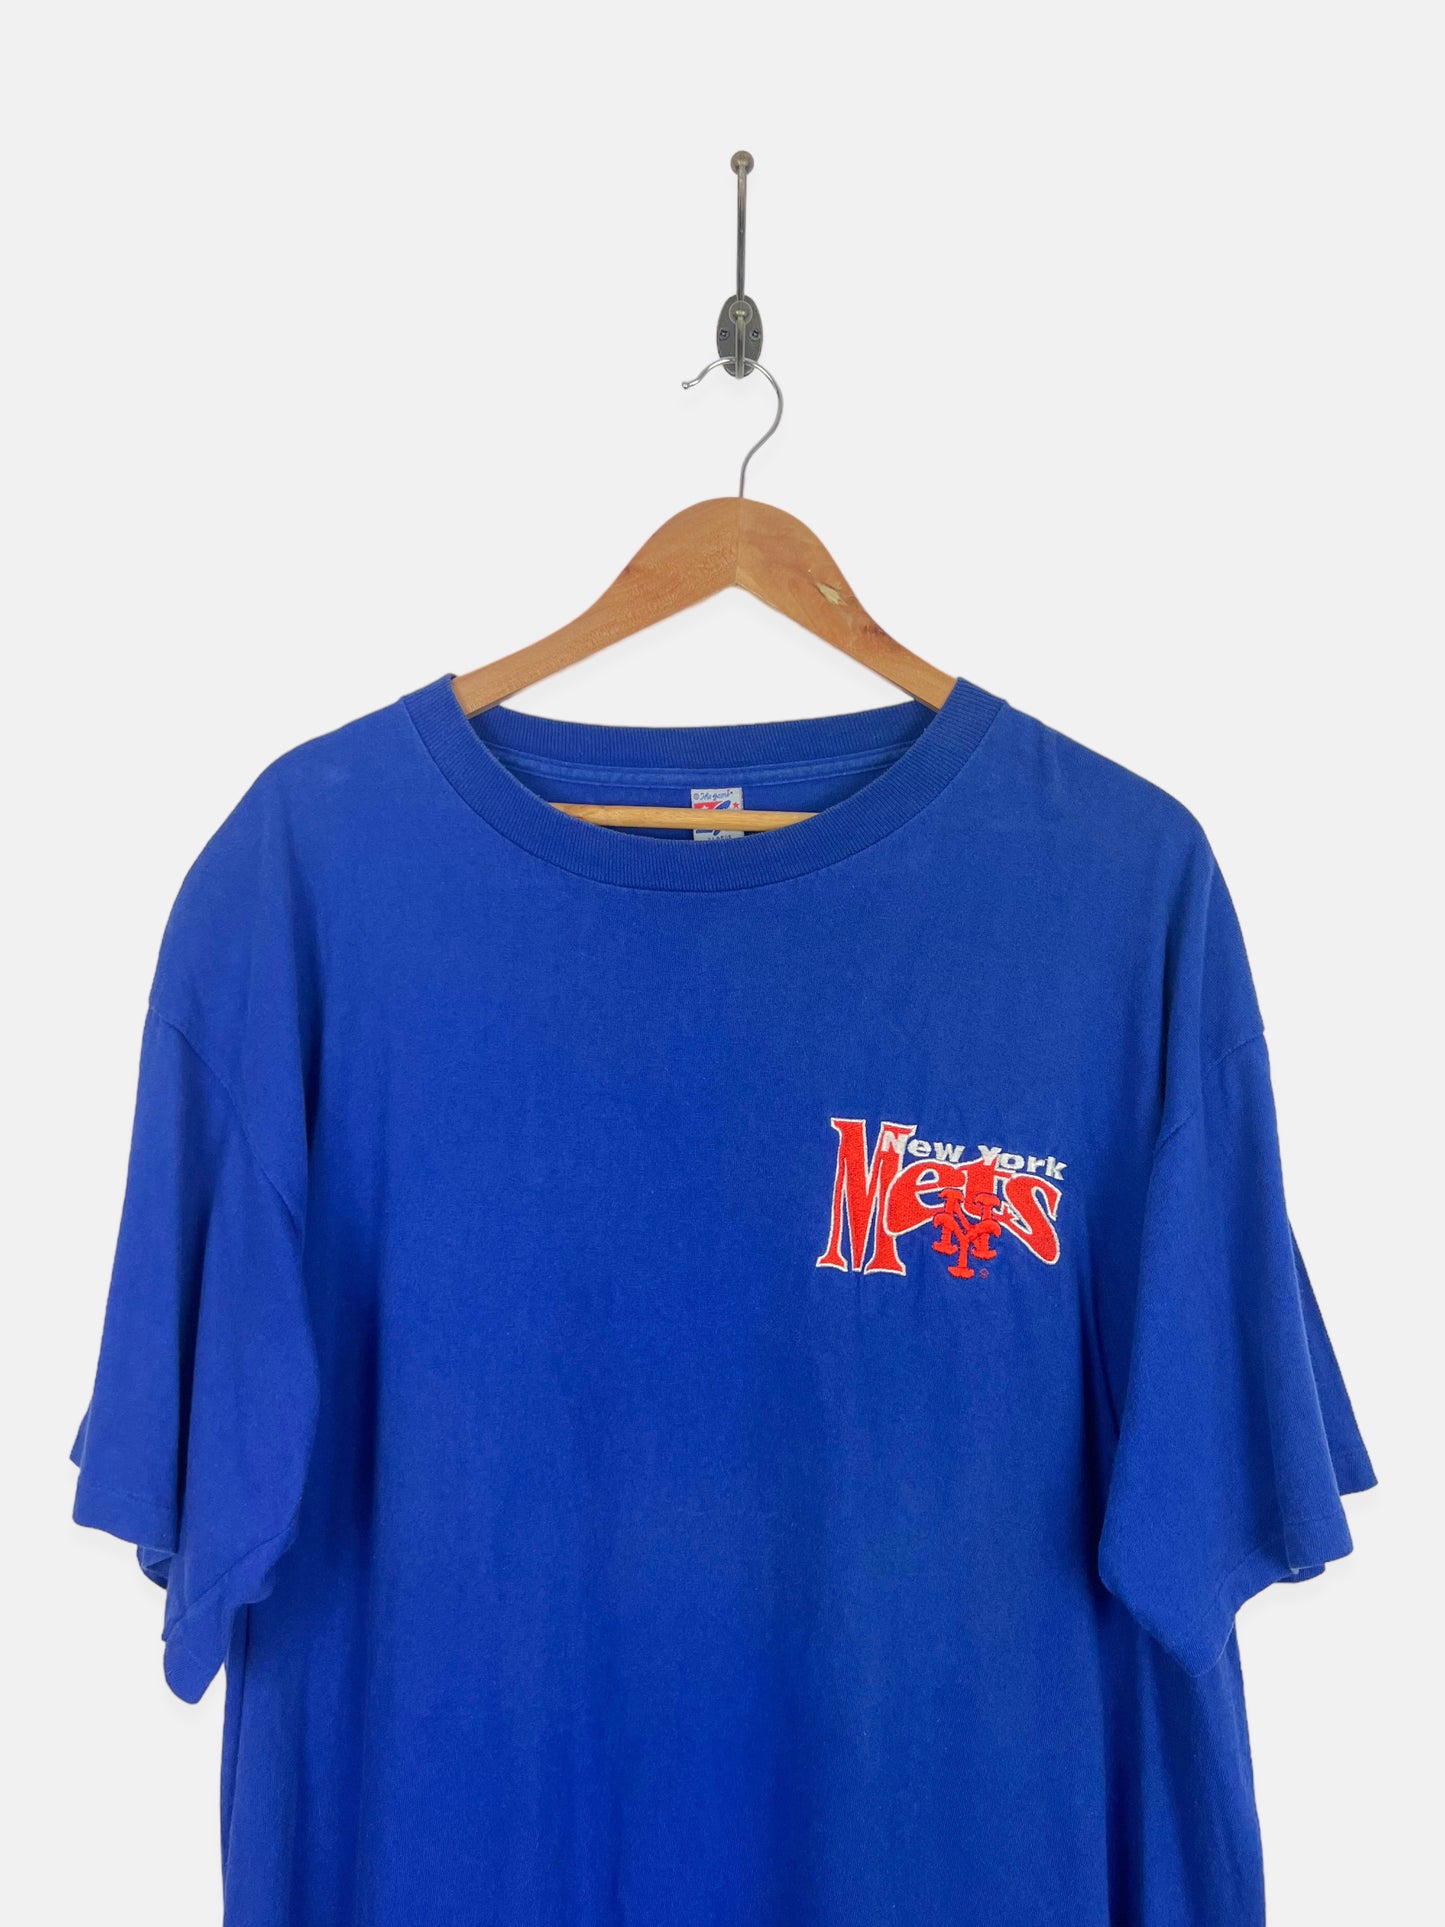 90's New York Mets MLB USA Made Embroidered Vintage T-Shirt Size XL